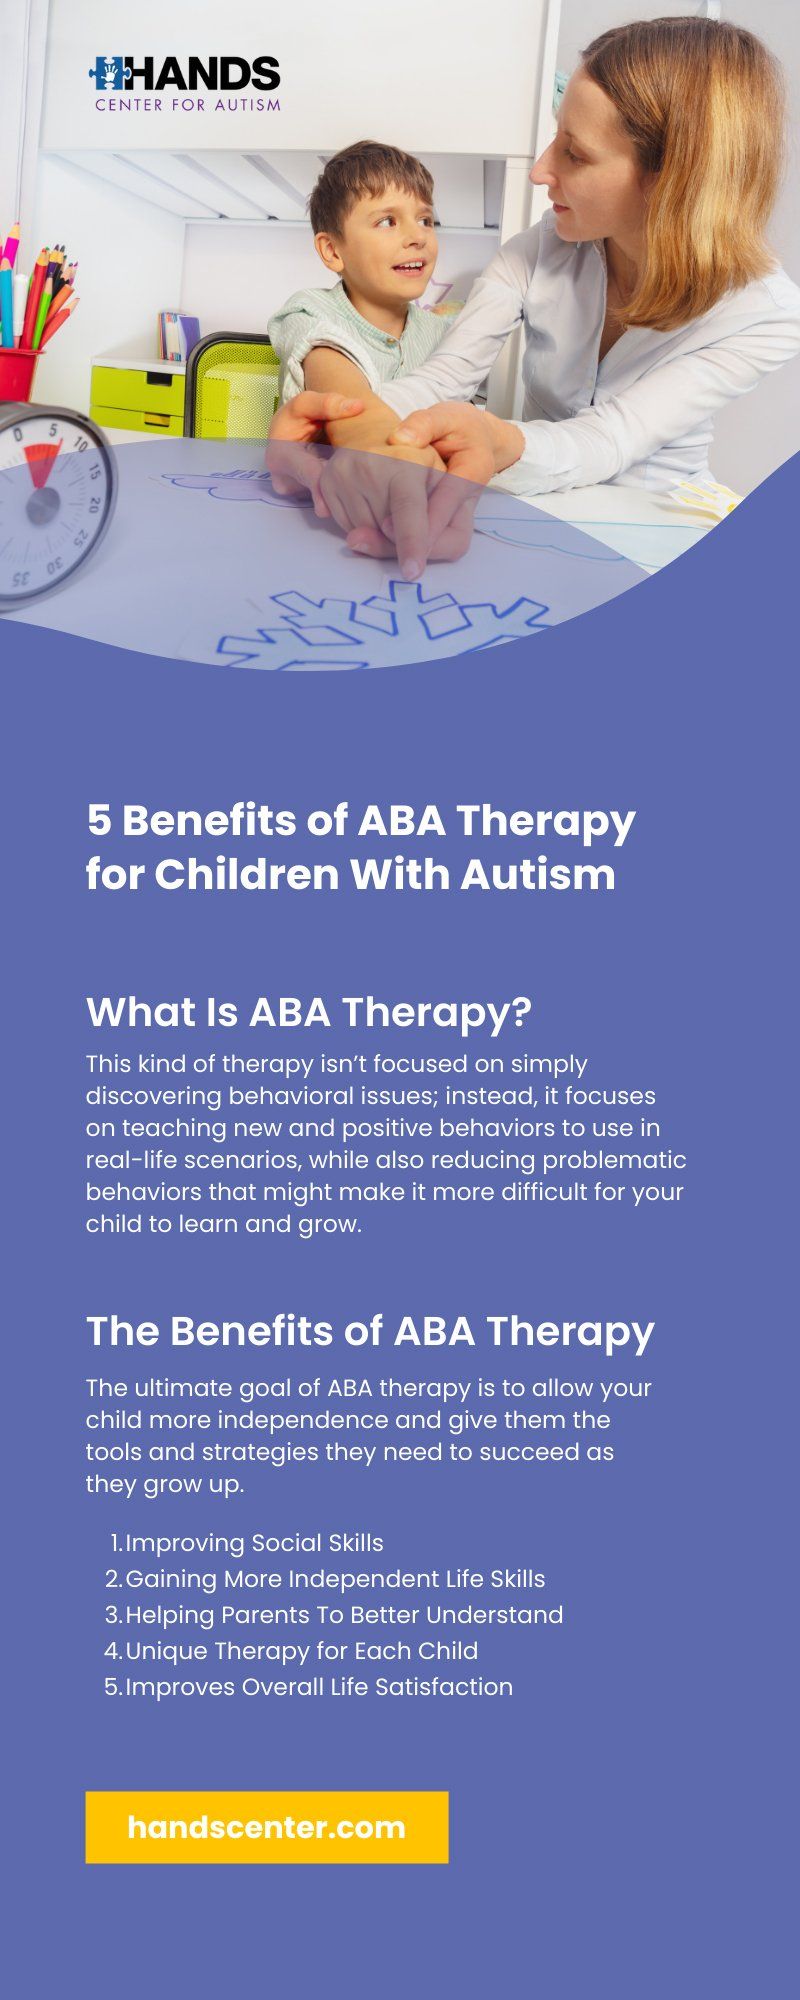 5 Benefits of ABA Therapy for Children With Autism